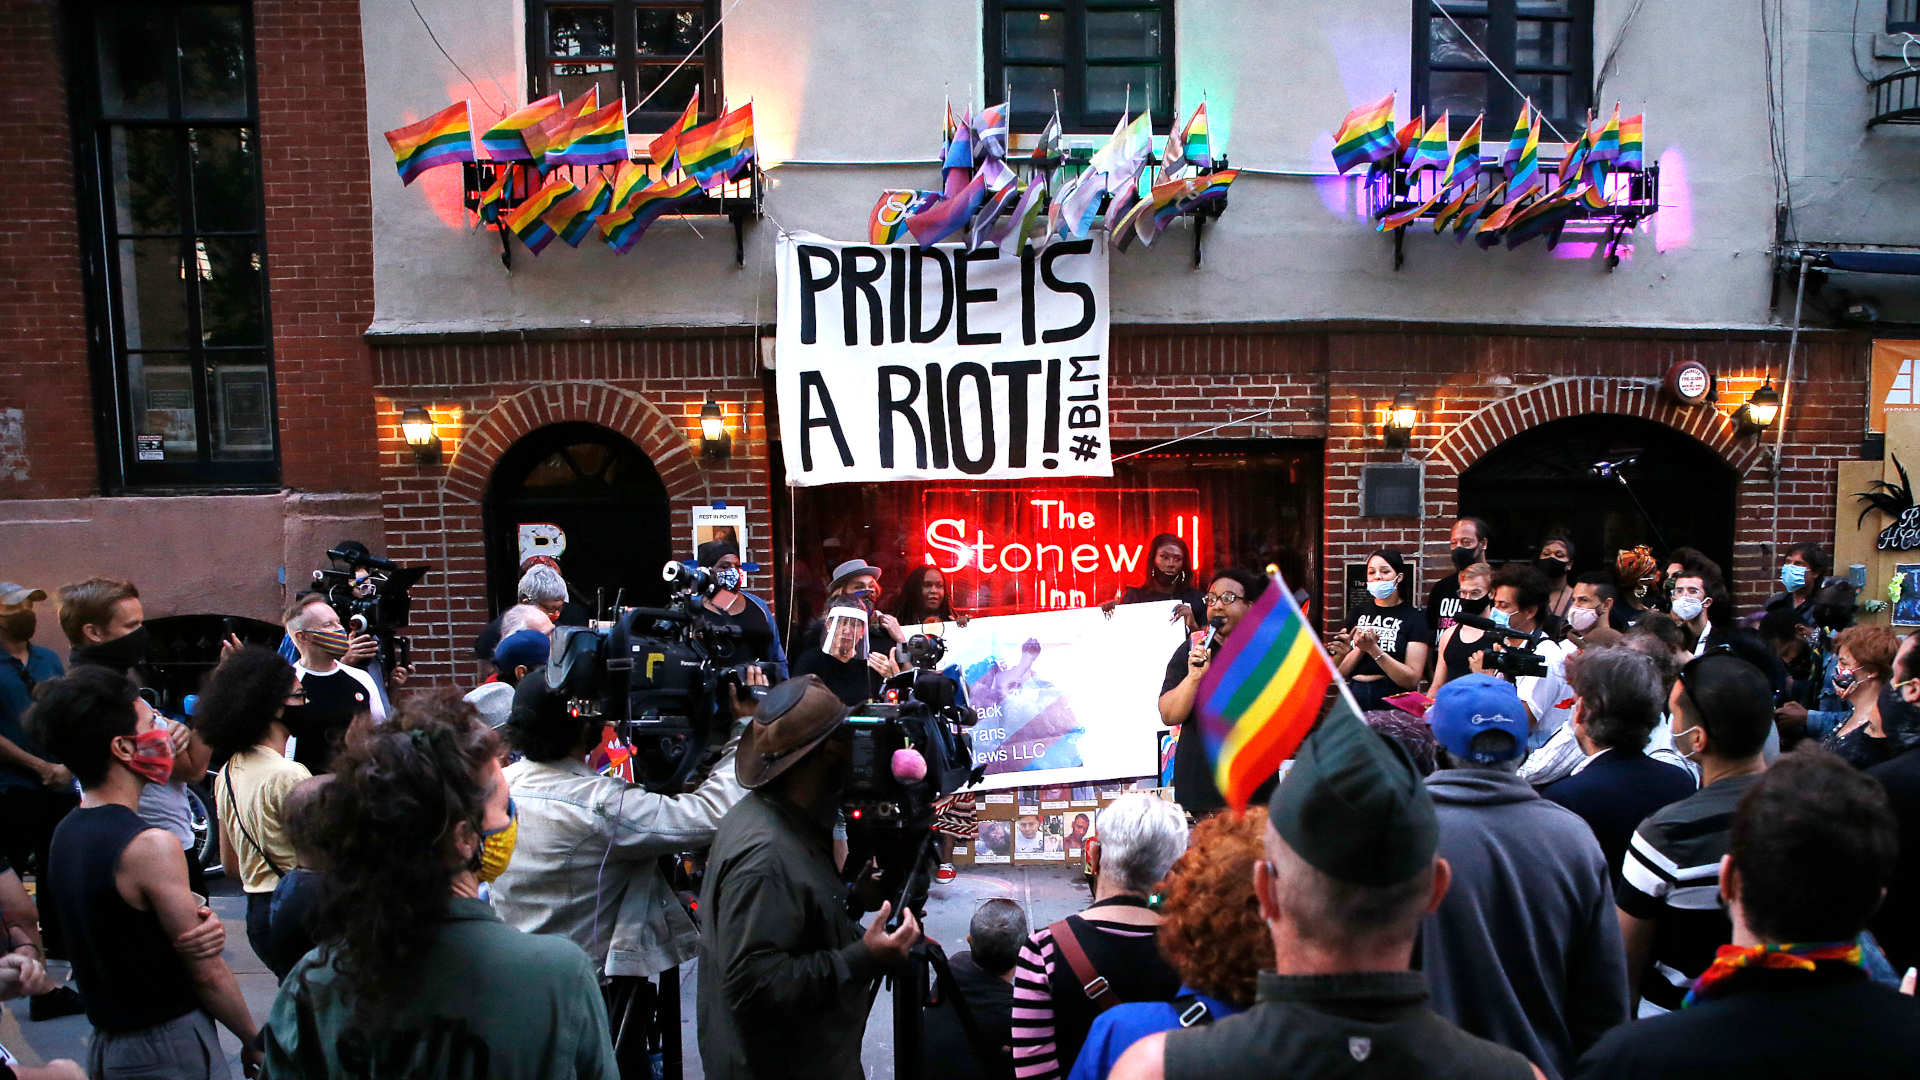 People gather at the historic Stonewall Inn in New York City to celebrate the Supreme Court's recent decision extending the Civil Rights Act of 1964 to LGBT employees, protecting them from workplace discrimination.